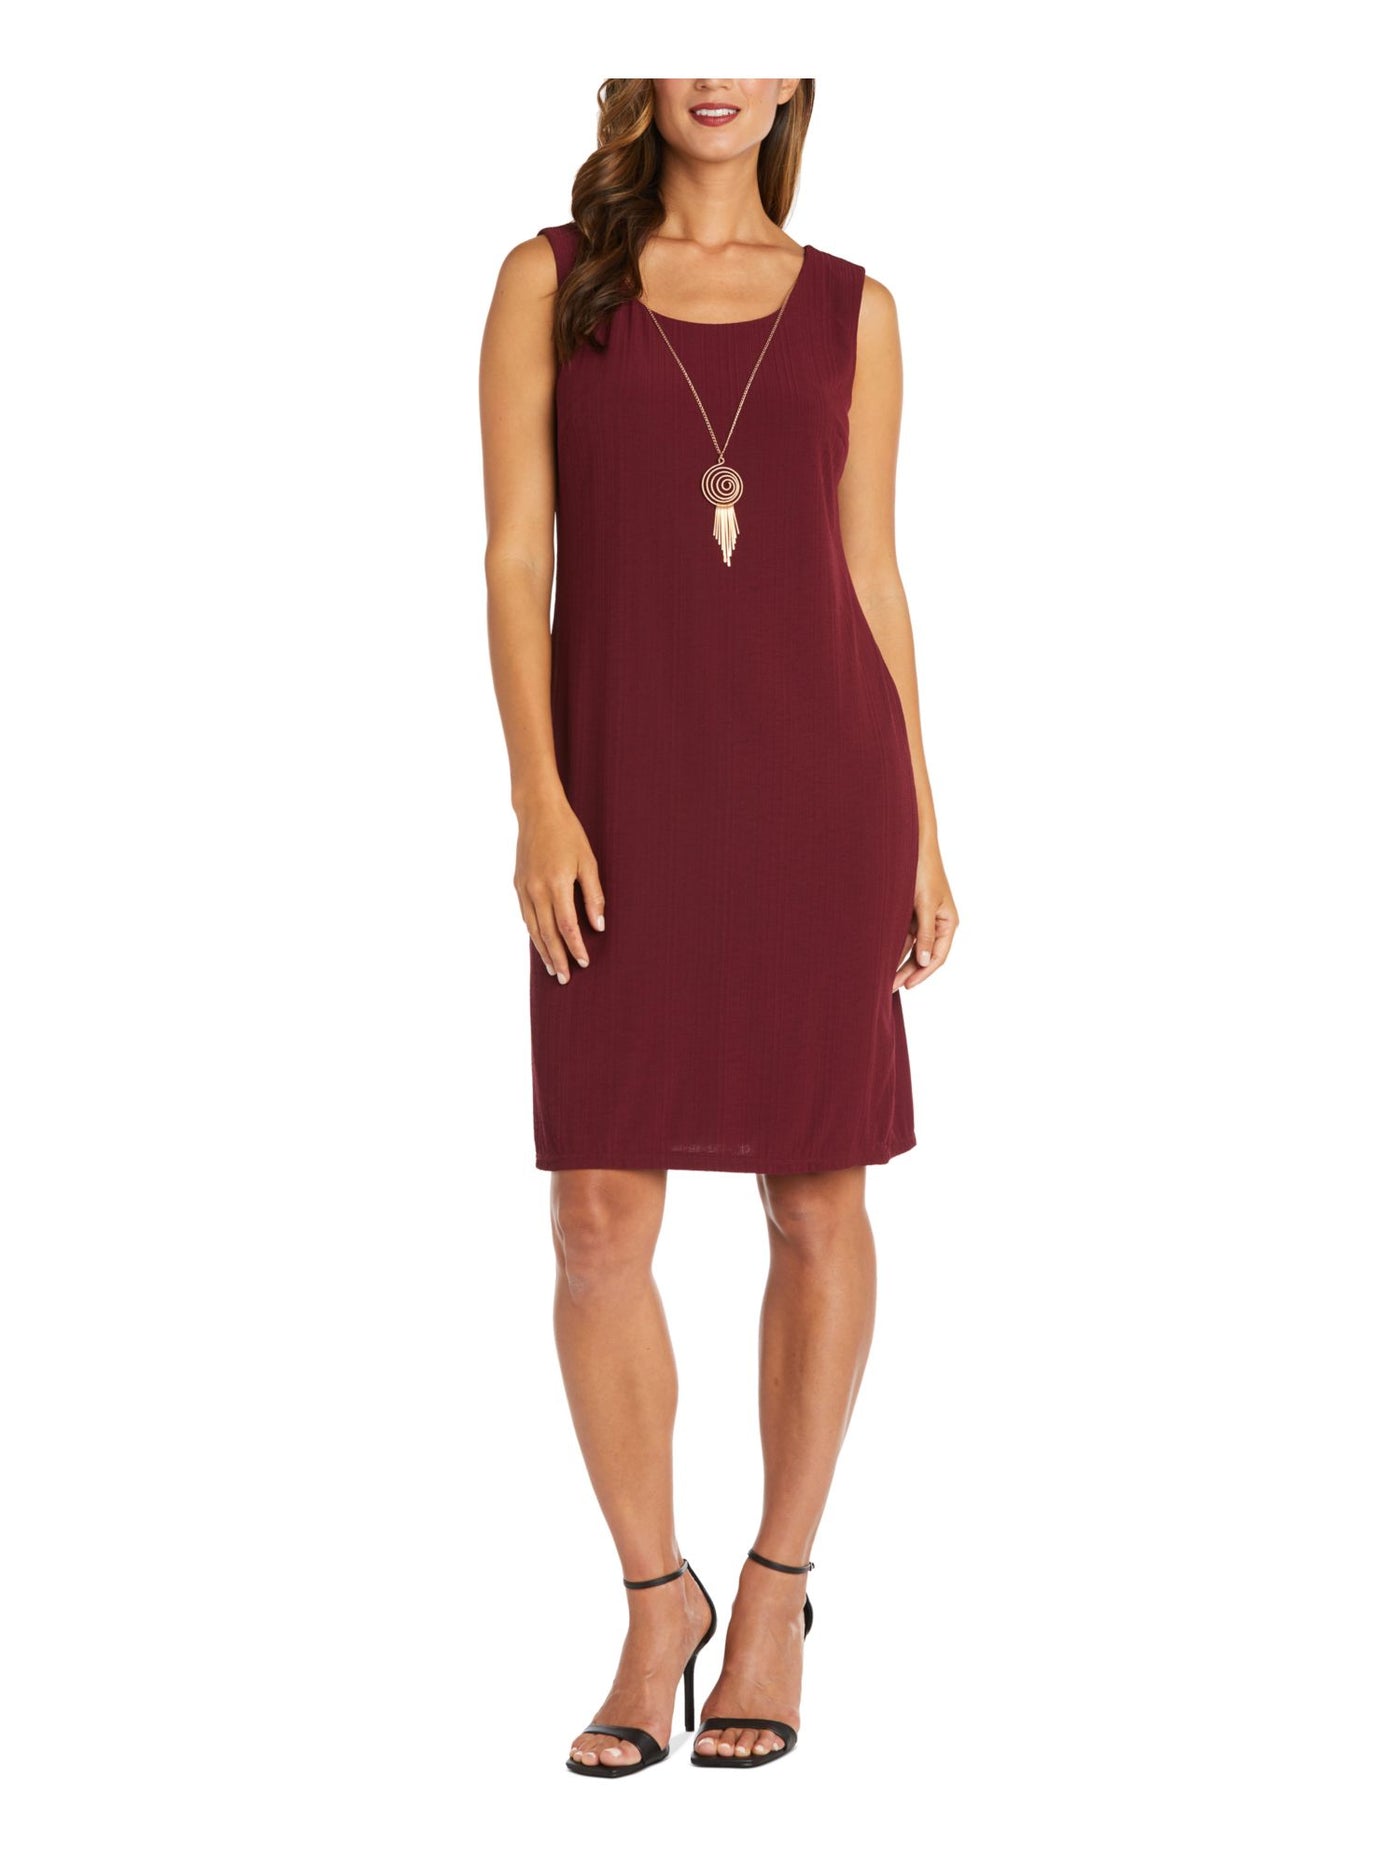 R&M RICHARDS Womens Burgundy Lined 3/4 Bell Sleeves Open Front Sleeveless Scoop Neck Knee Length Wear To Work Shift Dress 12